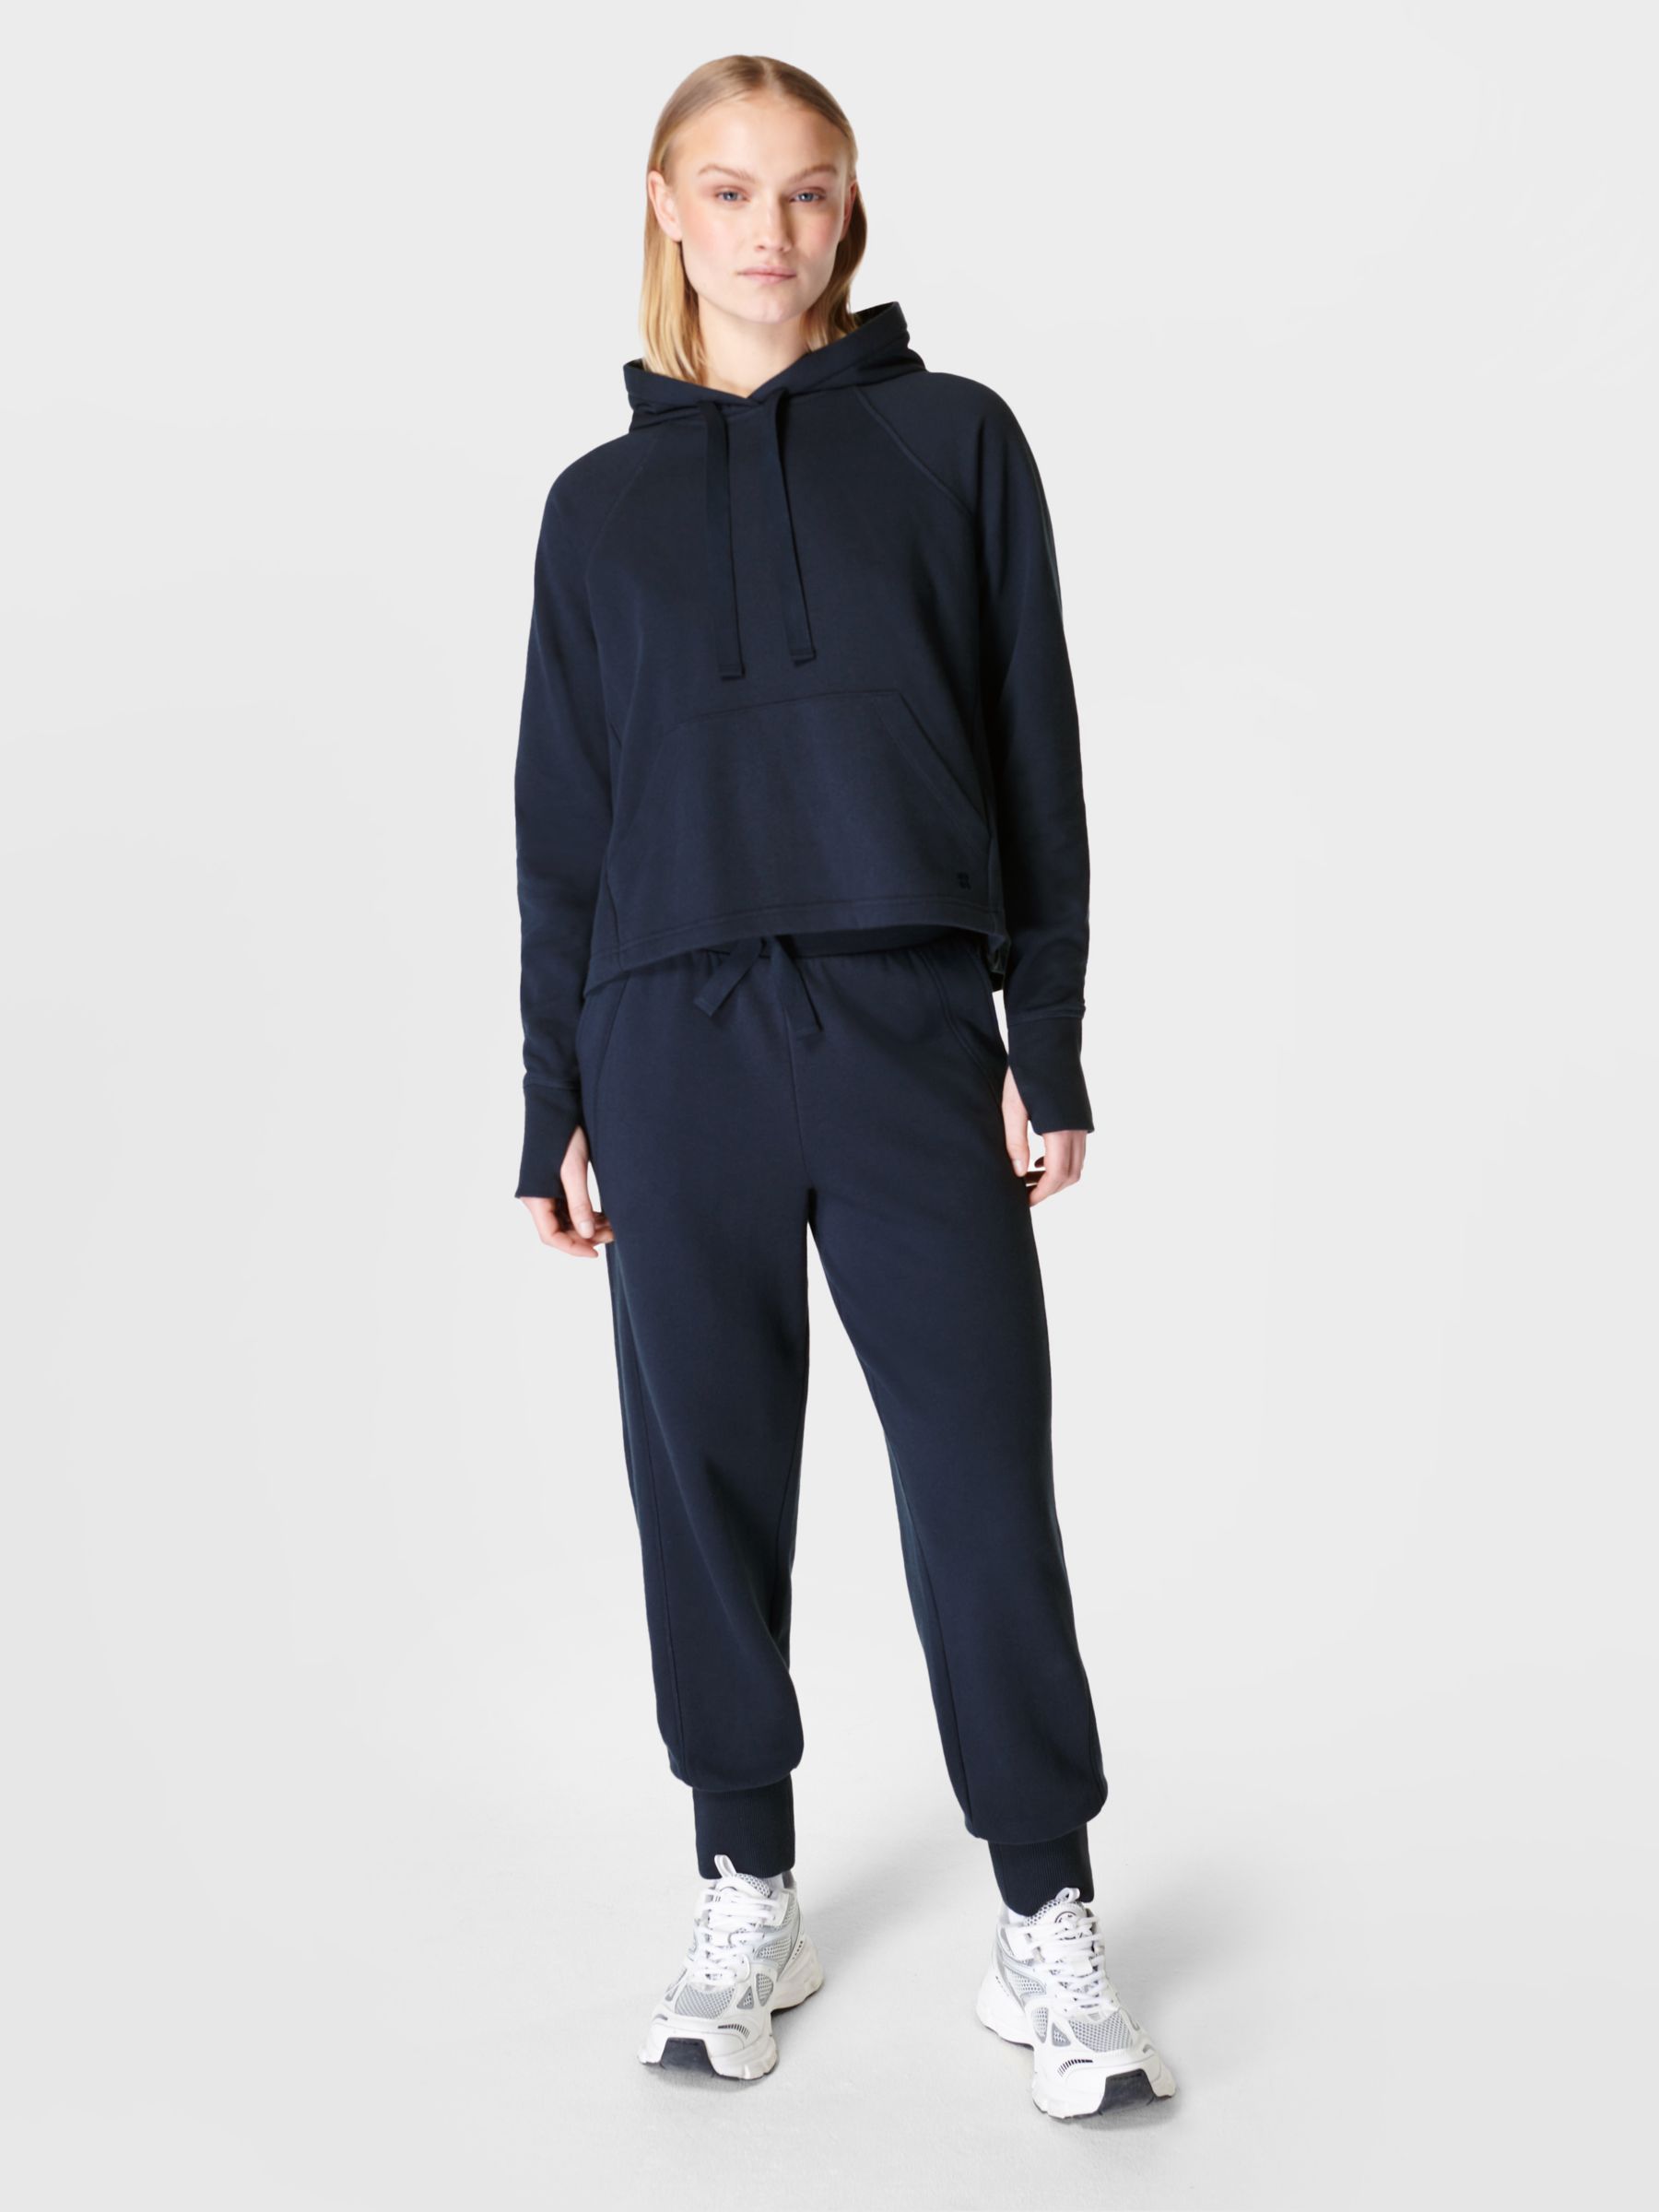 Sweaty Betty Revive Cuffed Jogger, Navy Blue at John Lewis & Partners